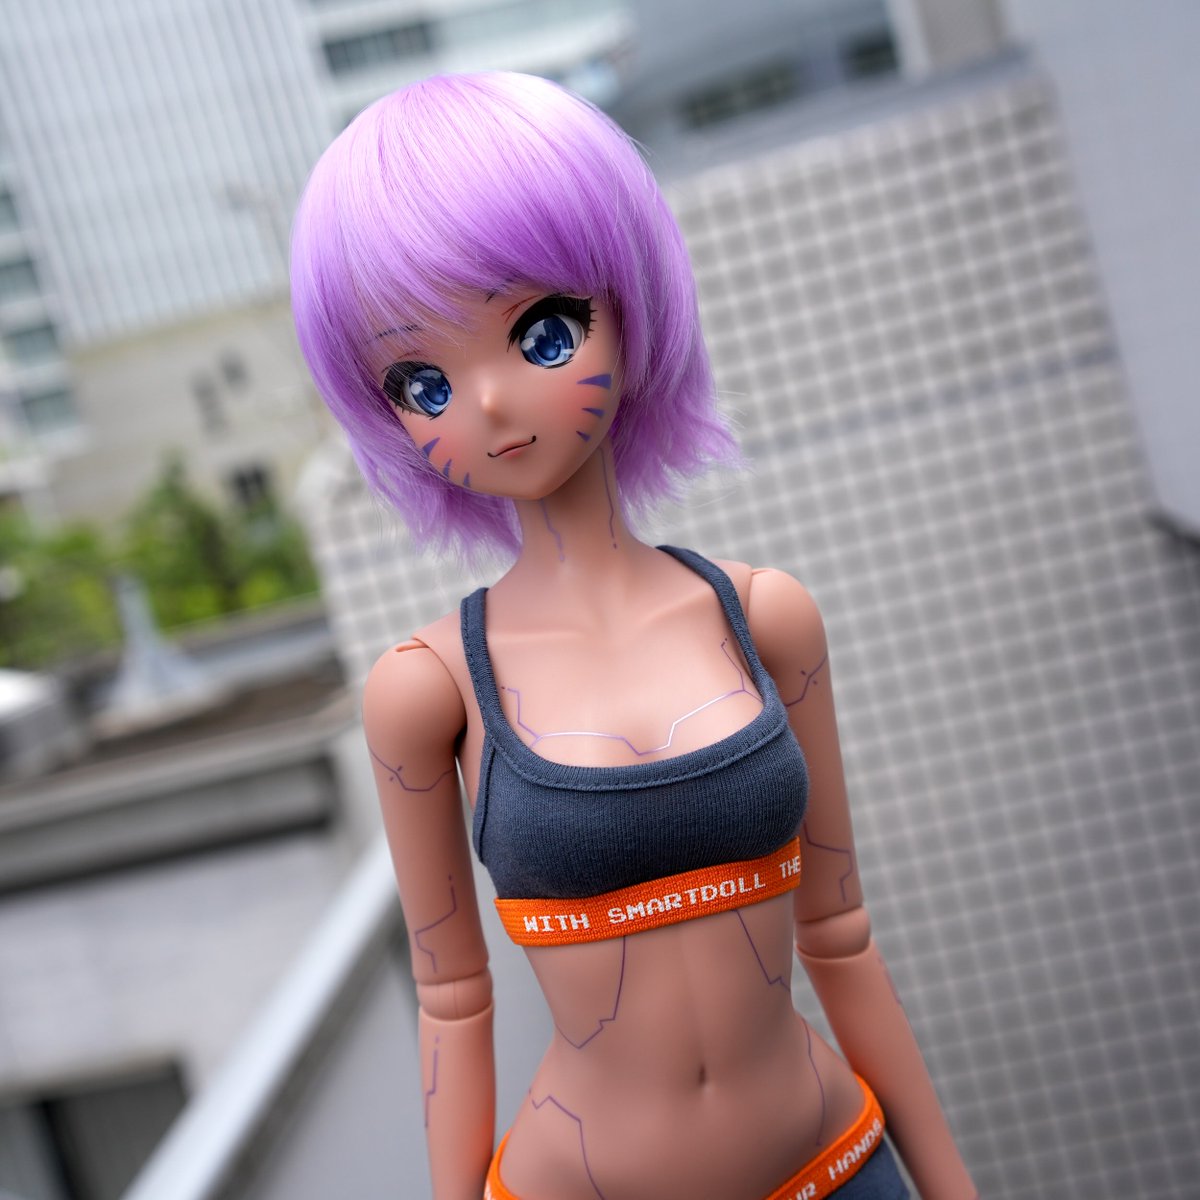 Smart Doll - Cyber Shell Prowess Anime (Tea) is available now. shop.smartdoll.jp/products/smart… #smartdoll